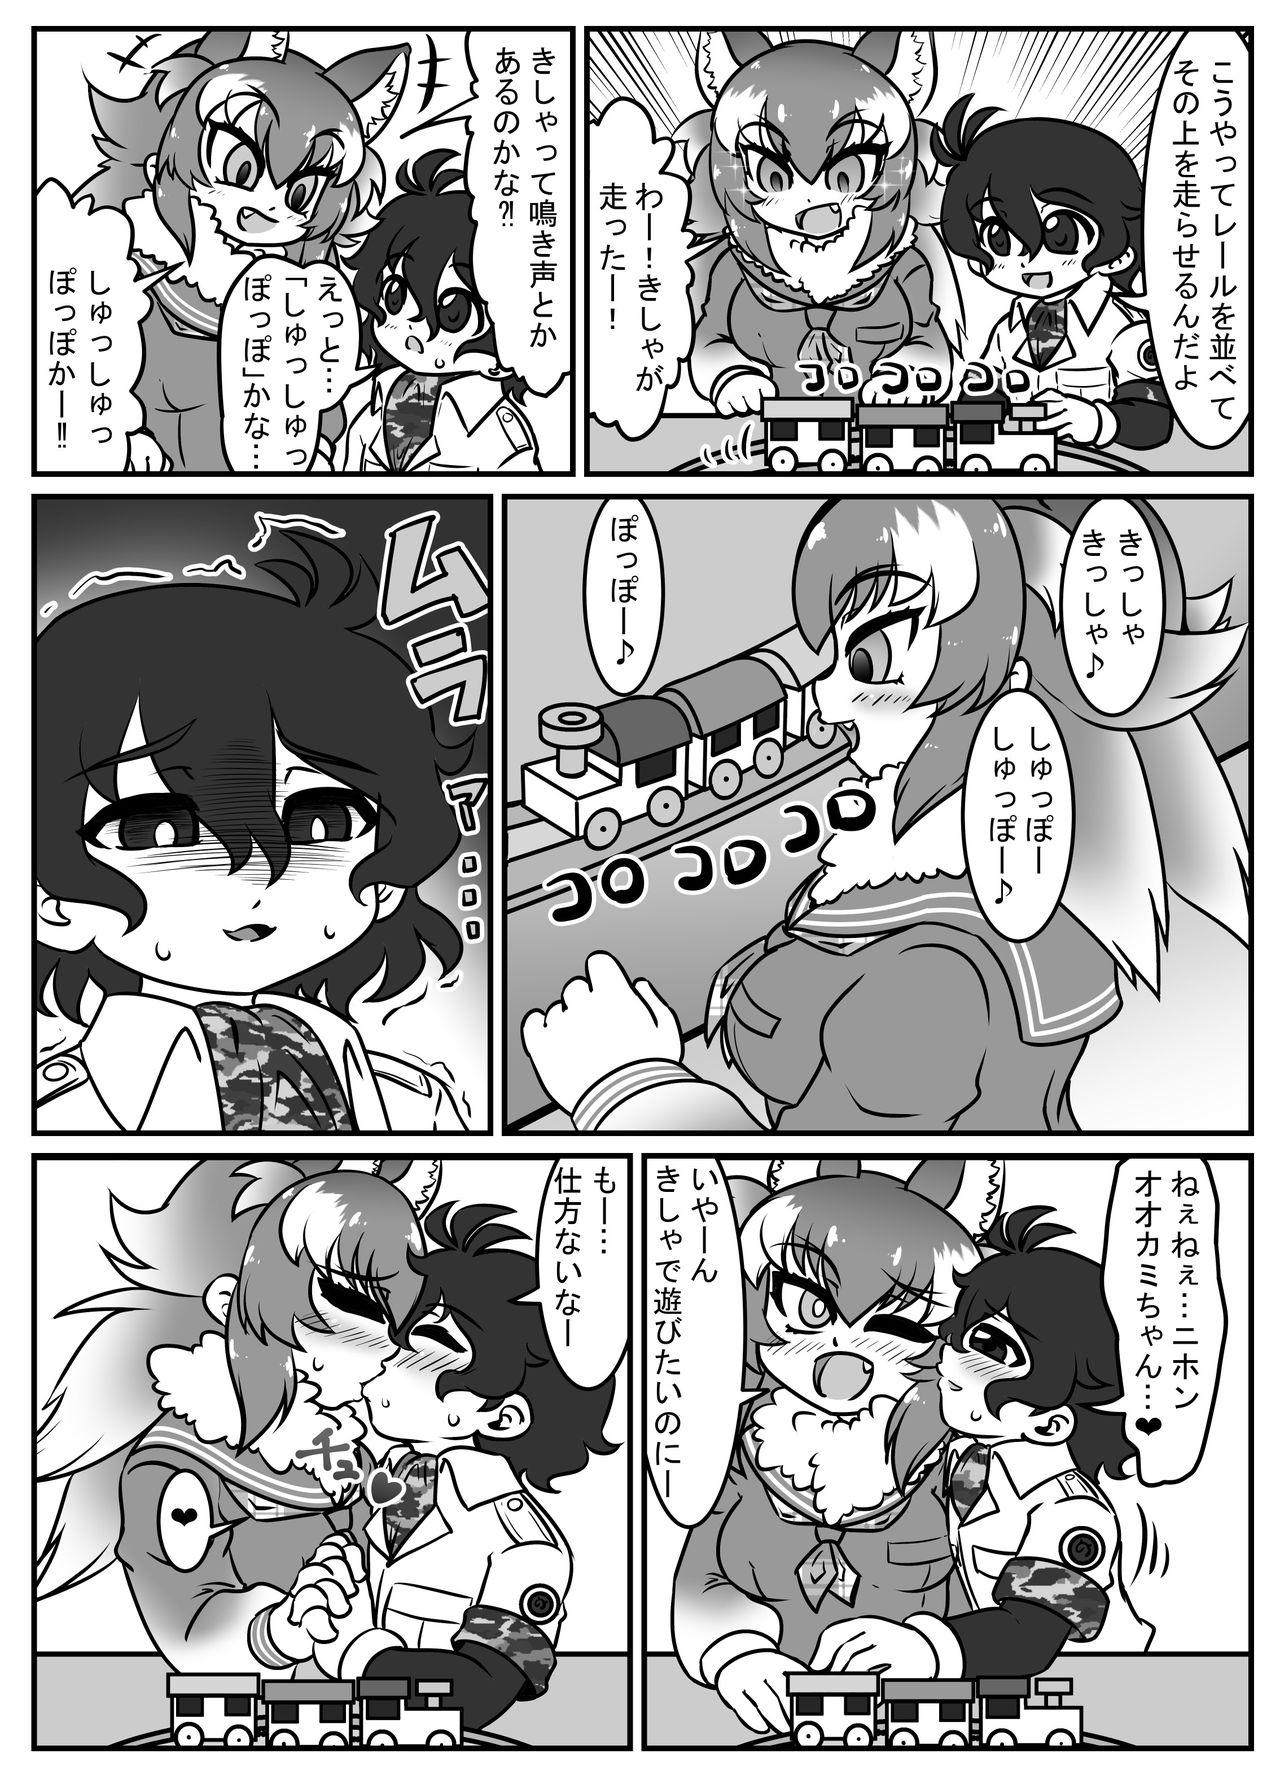 Young Old 絶滅したフレンズ ～ニホンオオカミ編～ - Kemono friends Anal Licking - Page 7